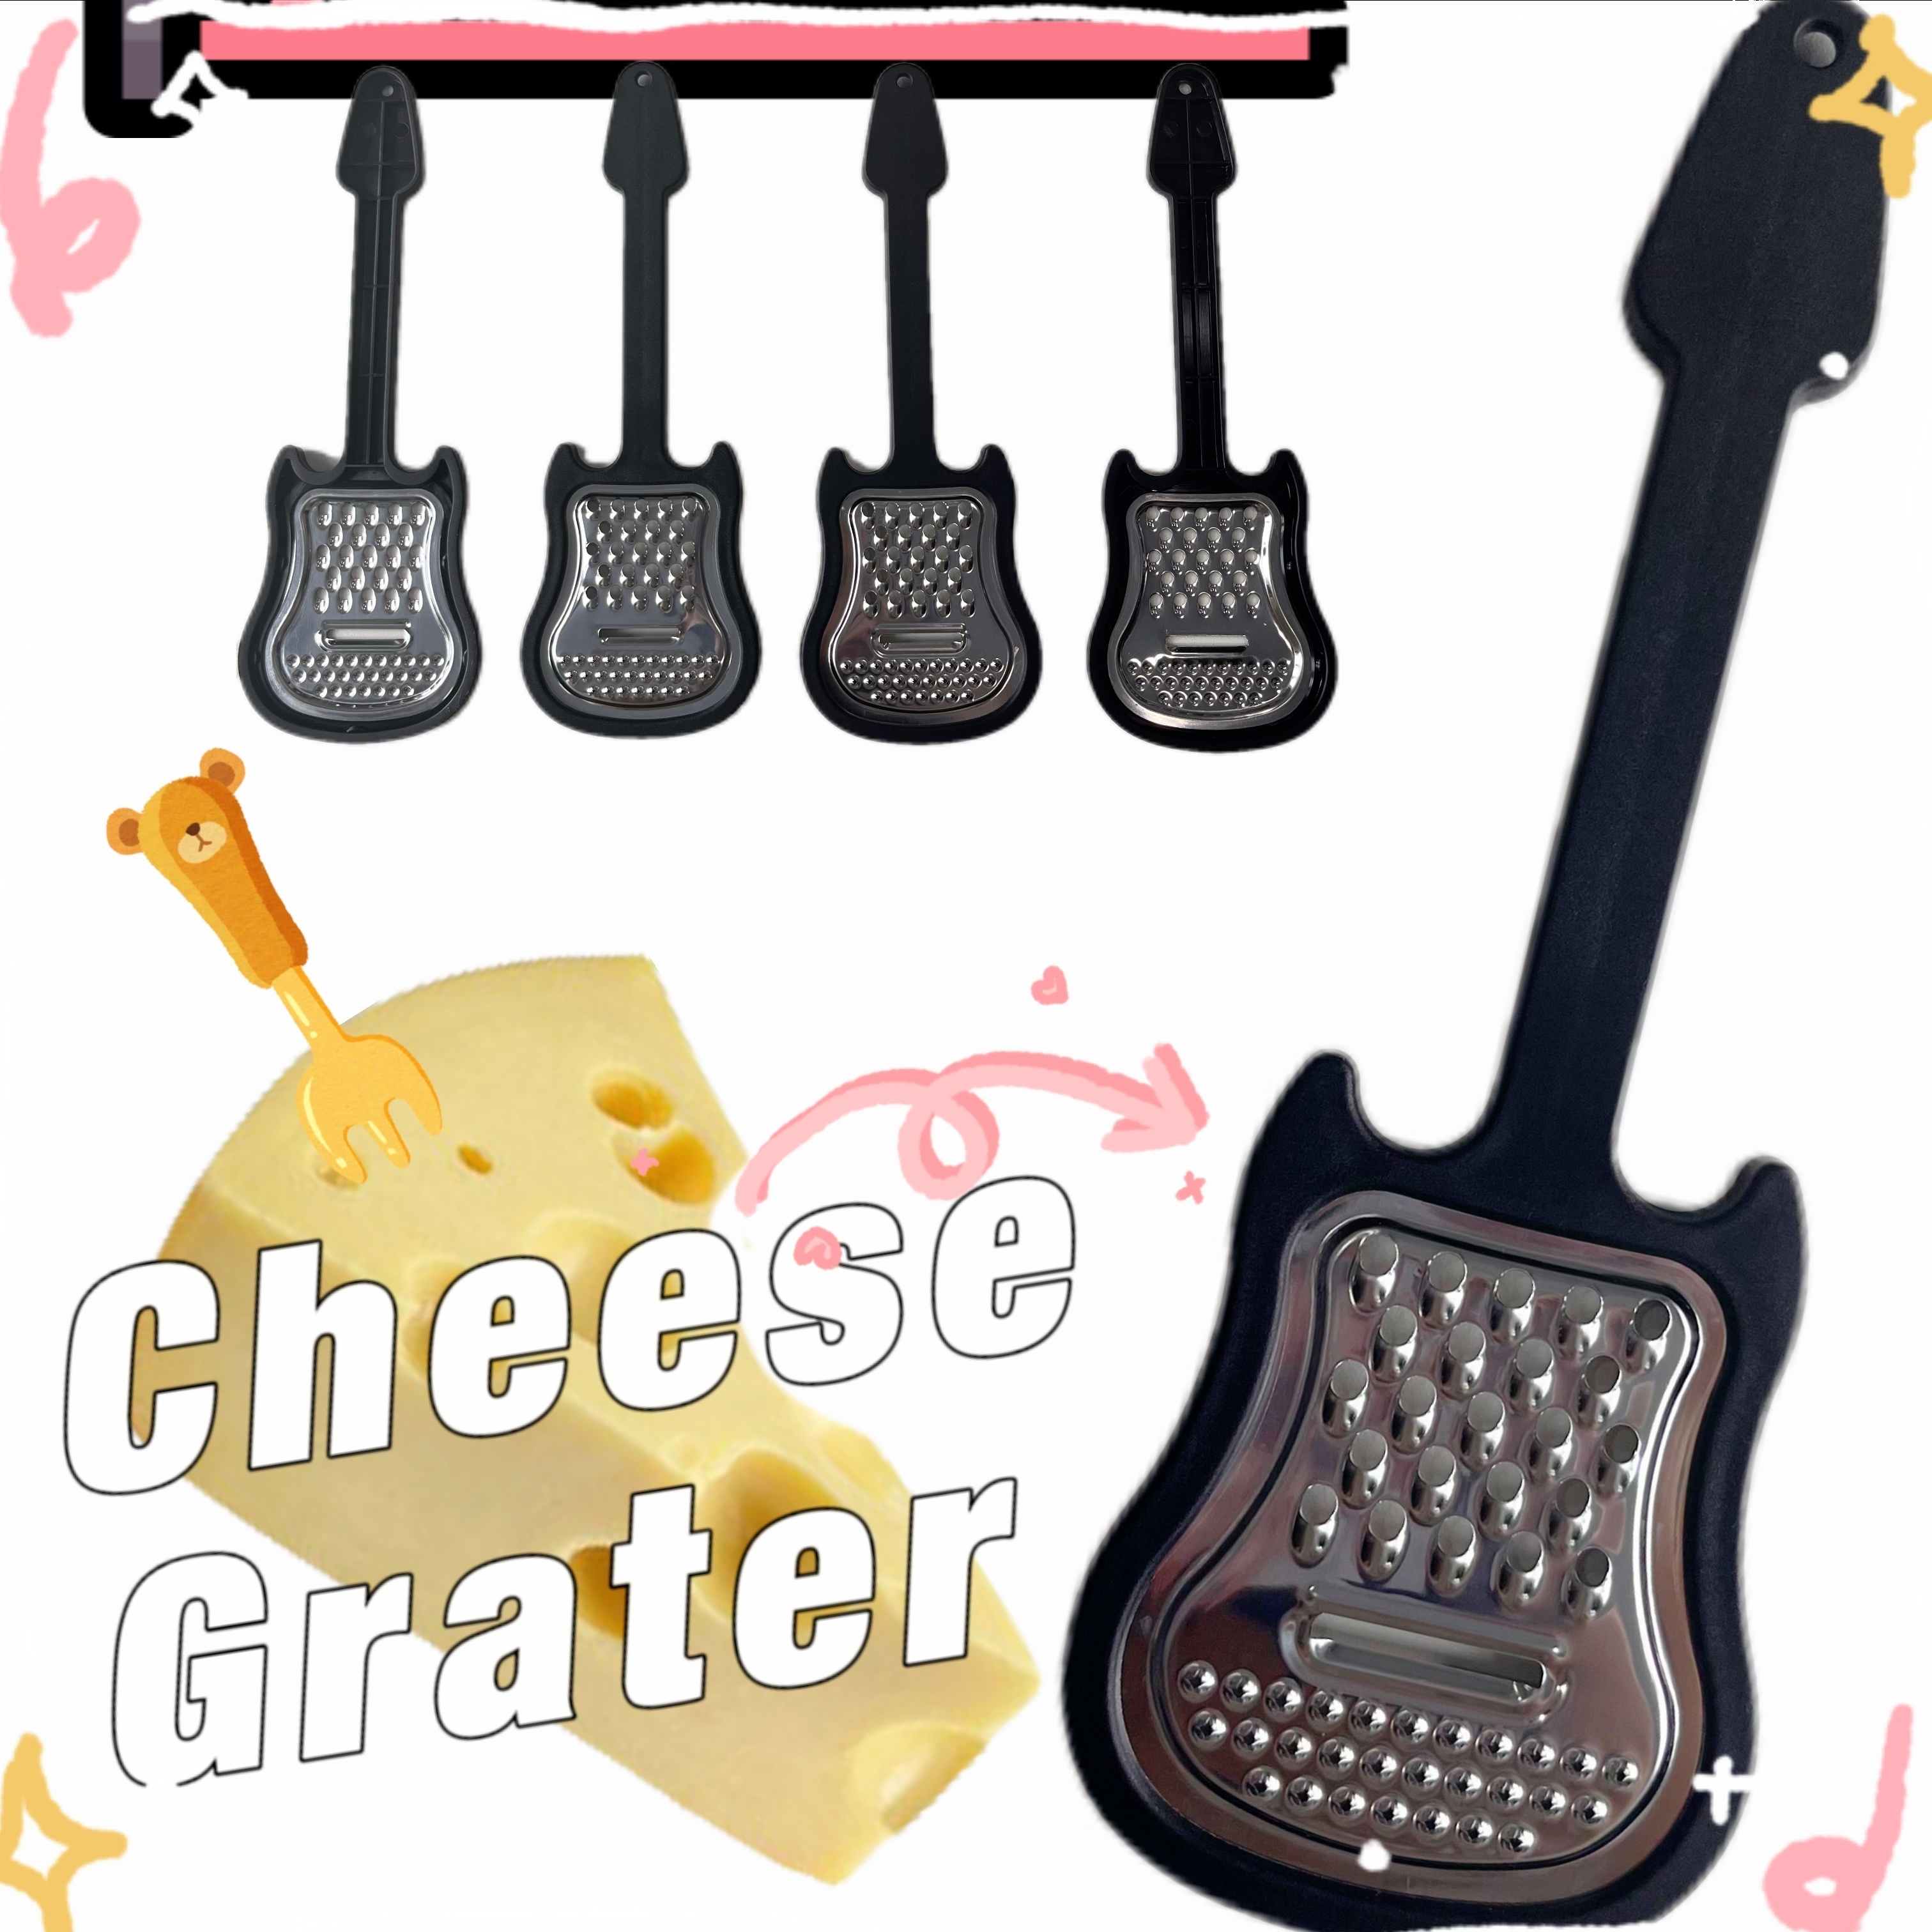  NEW!! Multi Monster 2-in-1 Cheese Grater & Spaghetti Spoon by  OTOTO - Grater & Ladles for Serving - Grater, Small Cheese Grater, Funny  Kitchen Gadgets, Cooking Gifts, Kitchen Grater, Kitchen Tool